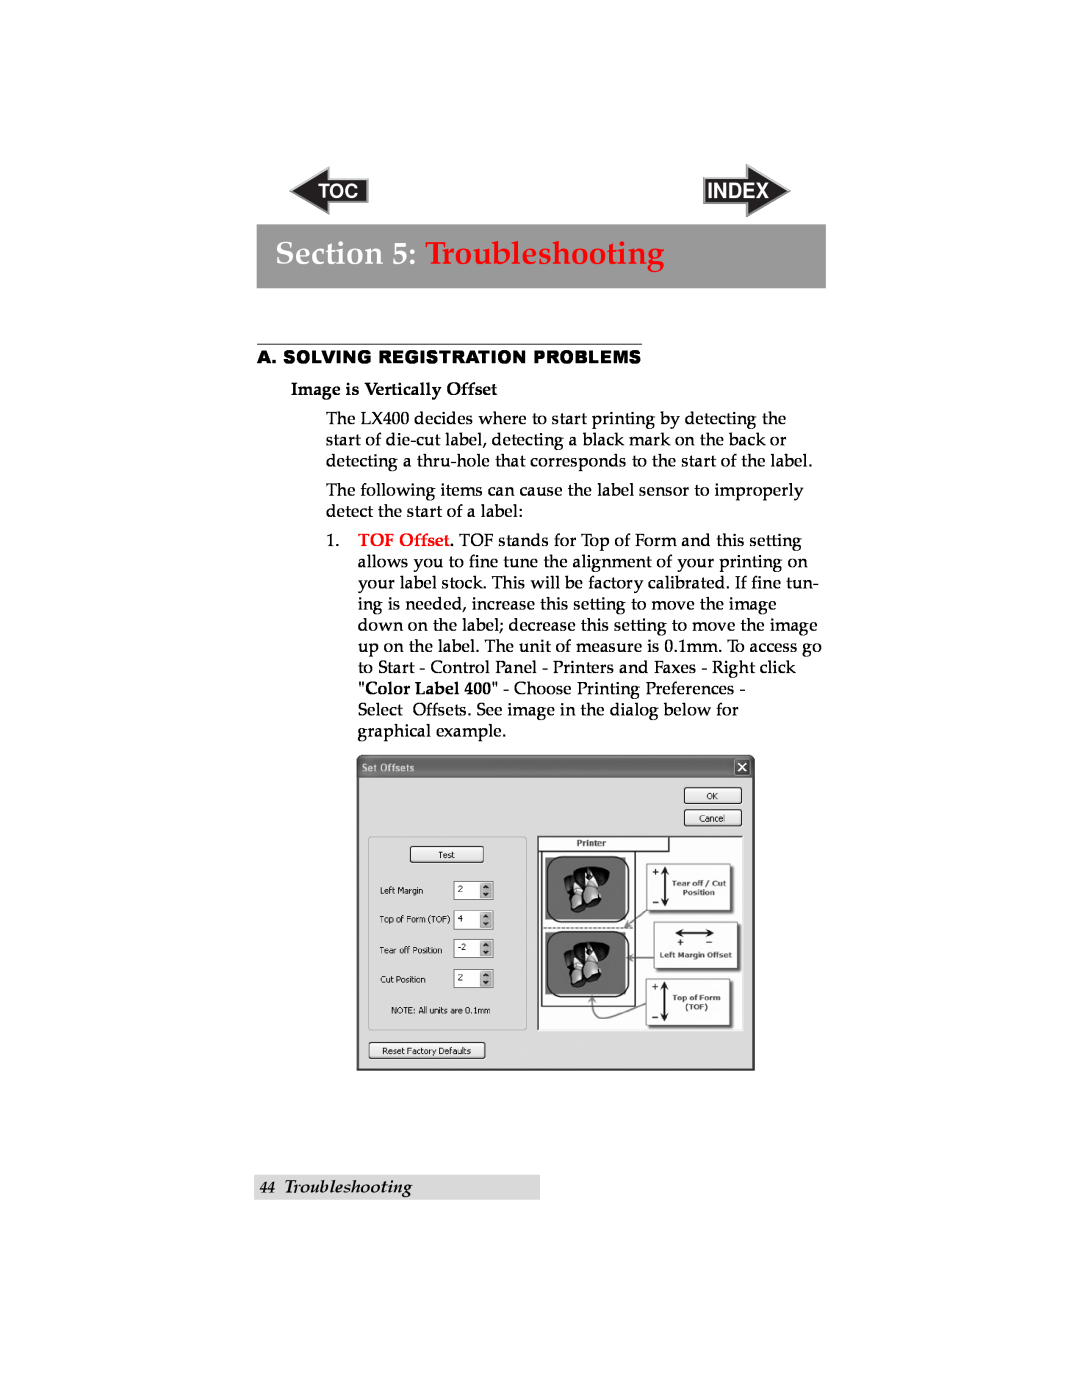 Primera Technology LX400 user manual Troubleshooting, A. Solving Registration Problems, Index 